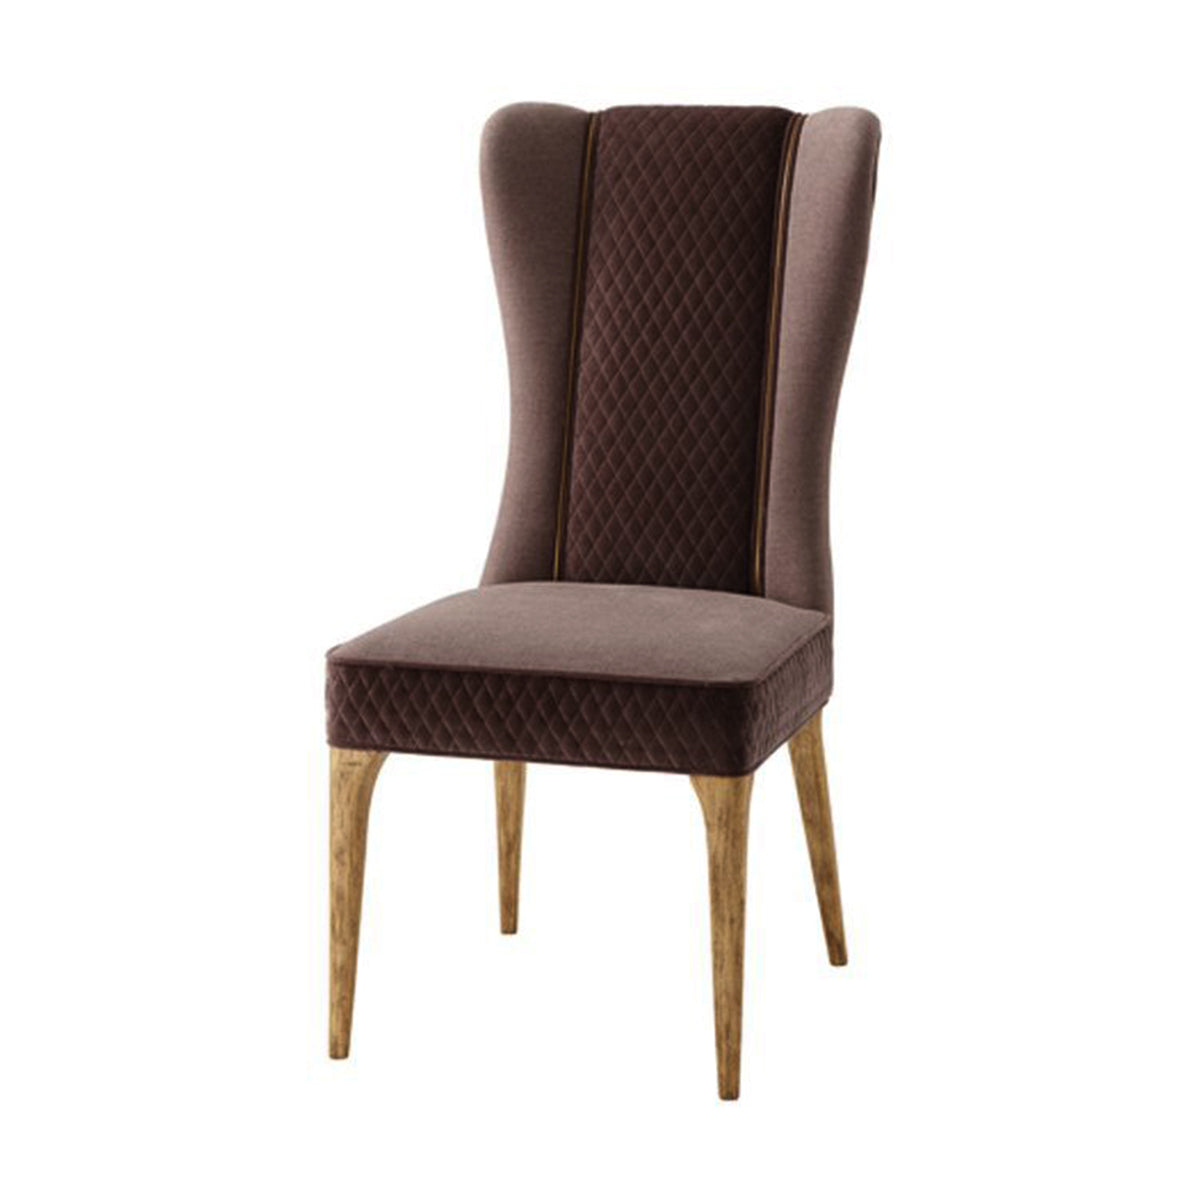 HASTINGS DINING SIDE CHAIR